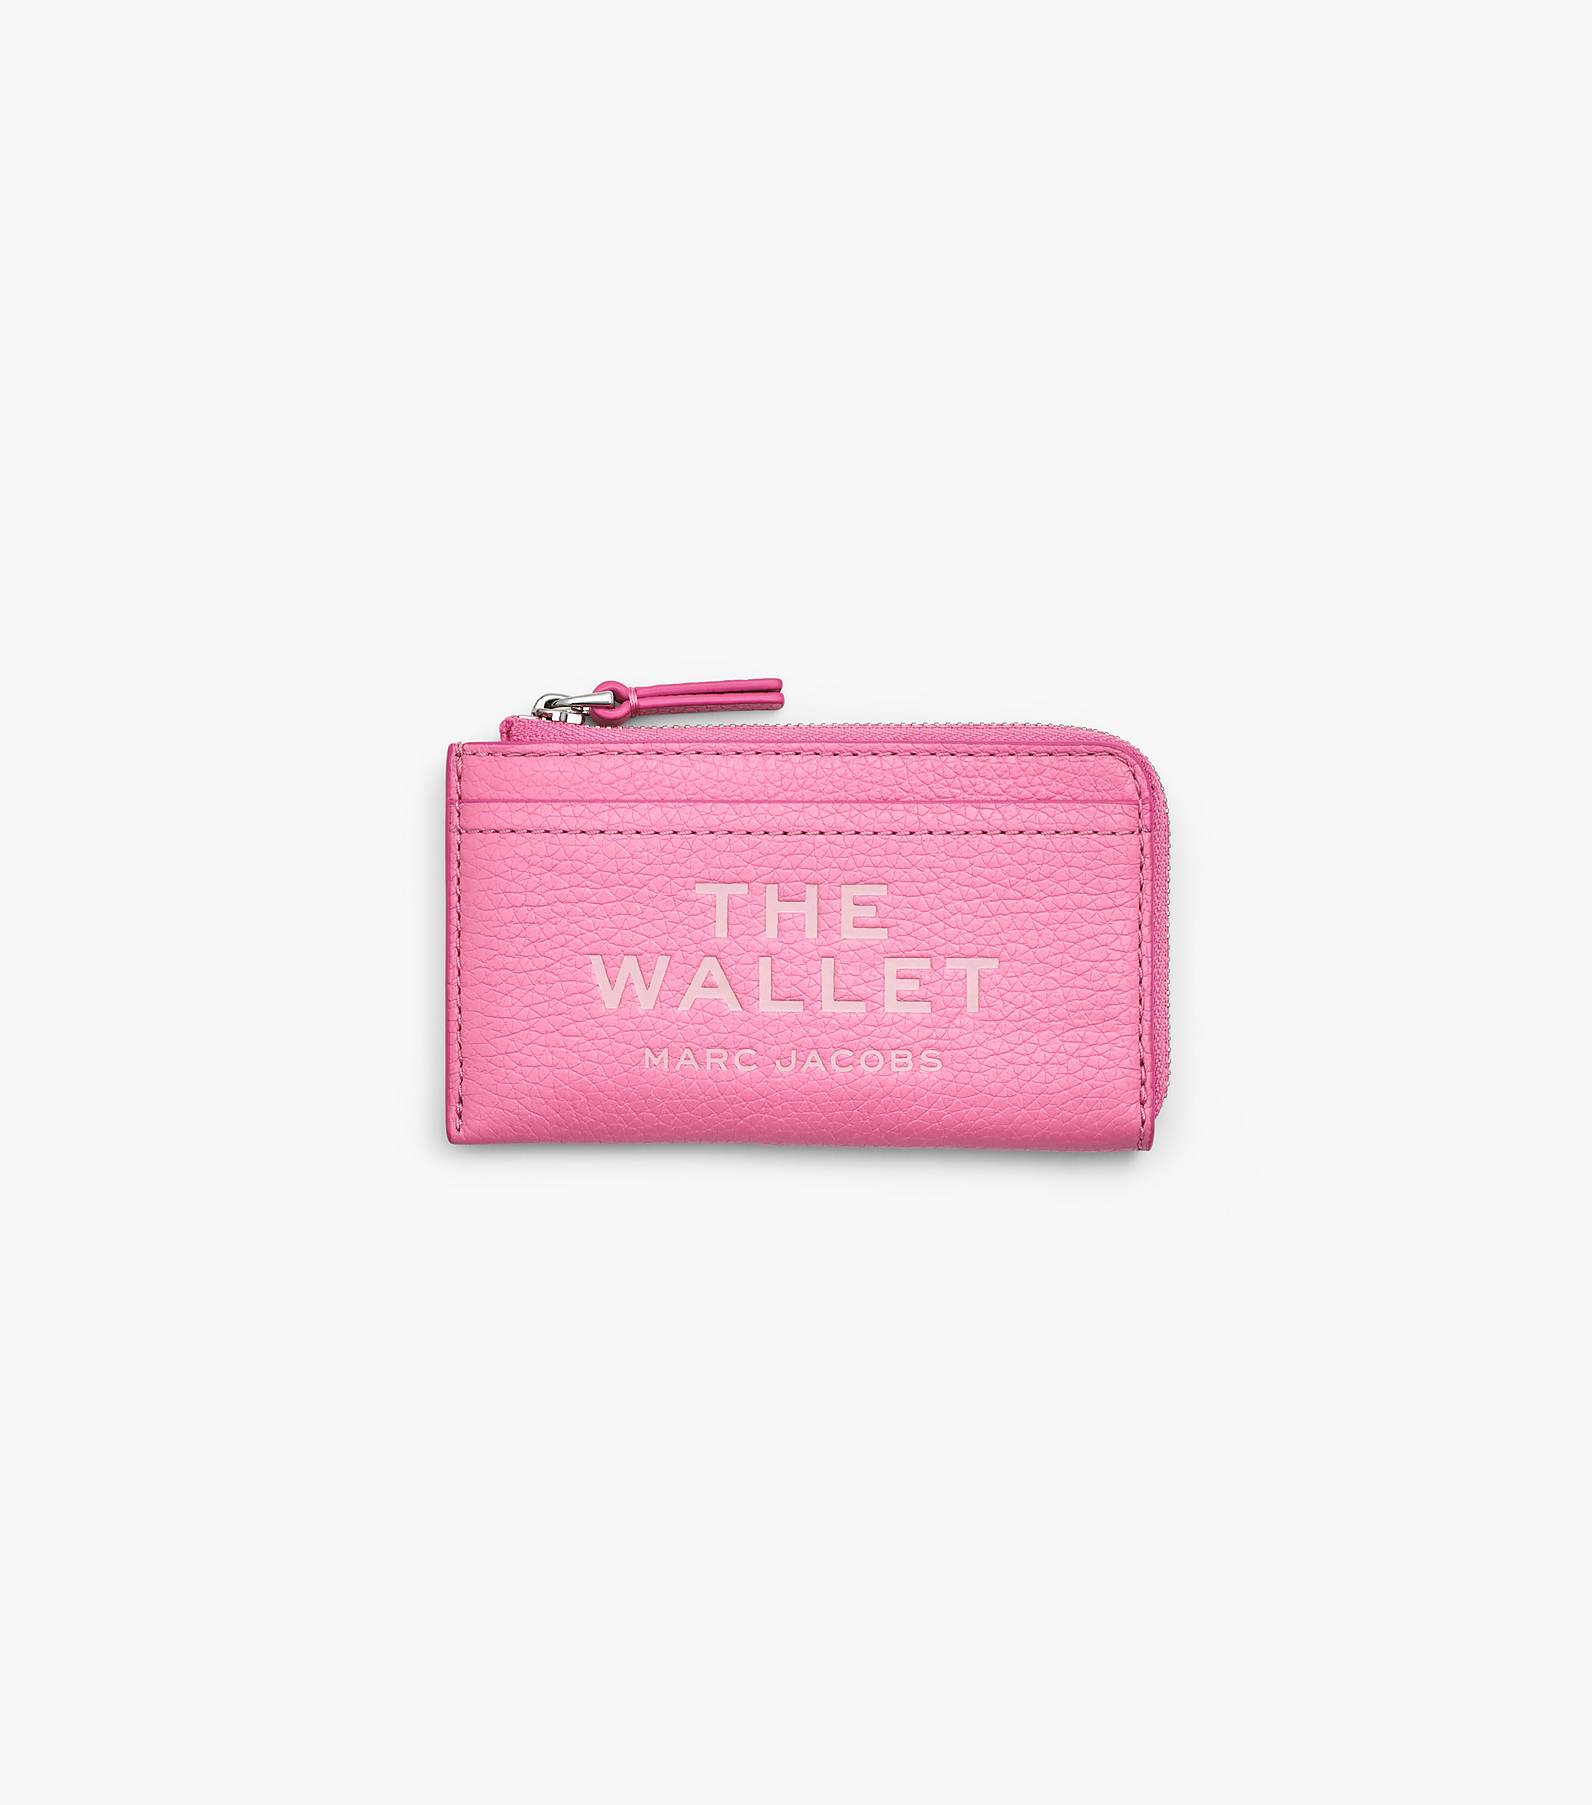 THE LEATHER TOP ZIP MULTI WALLET